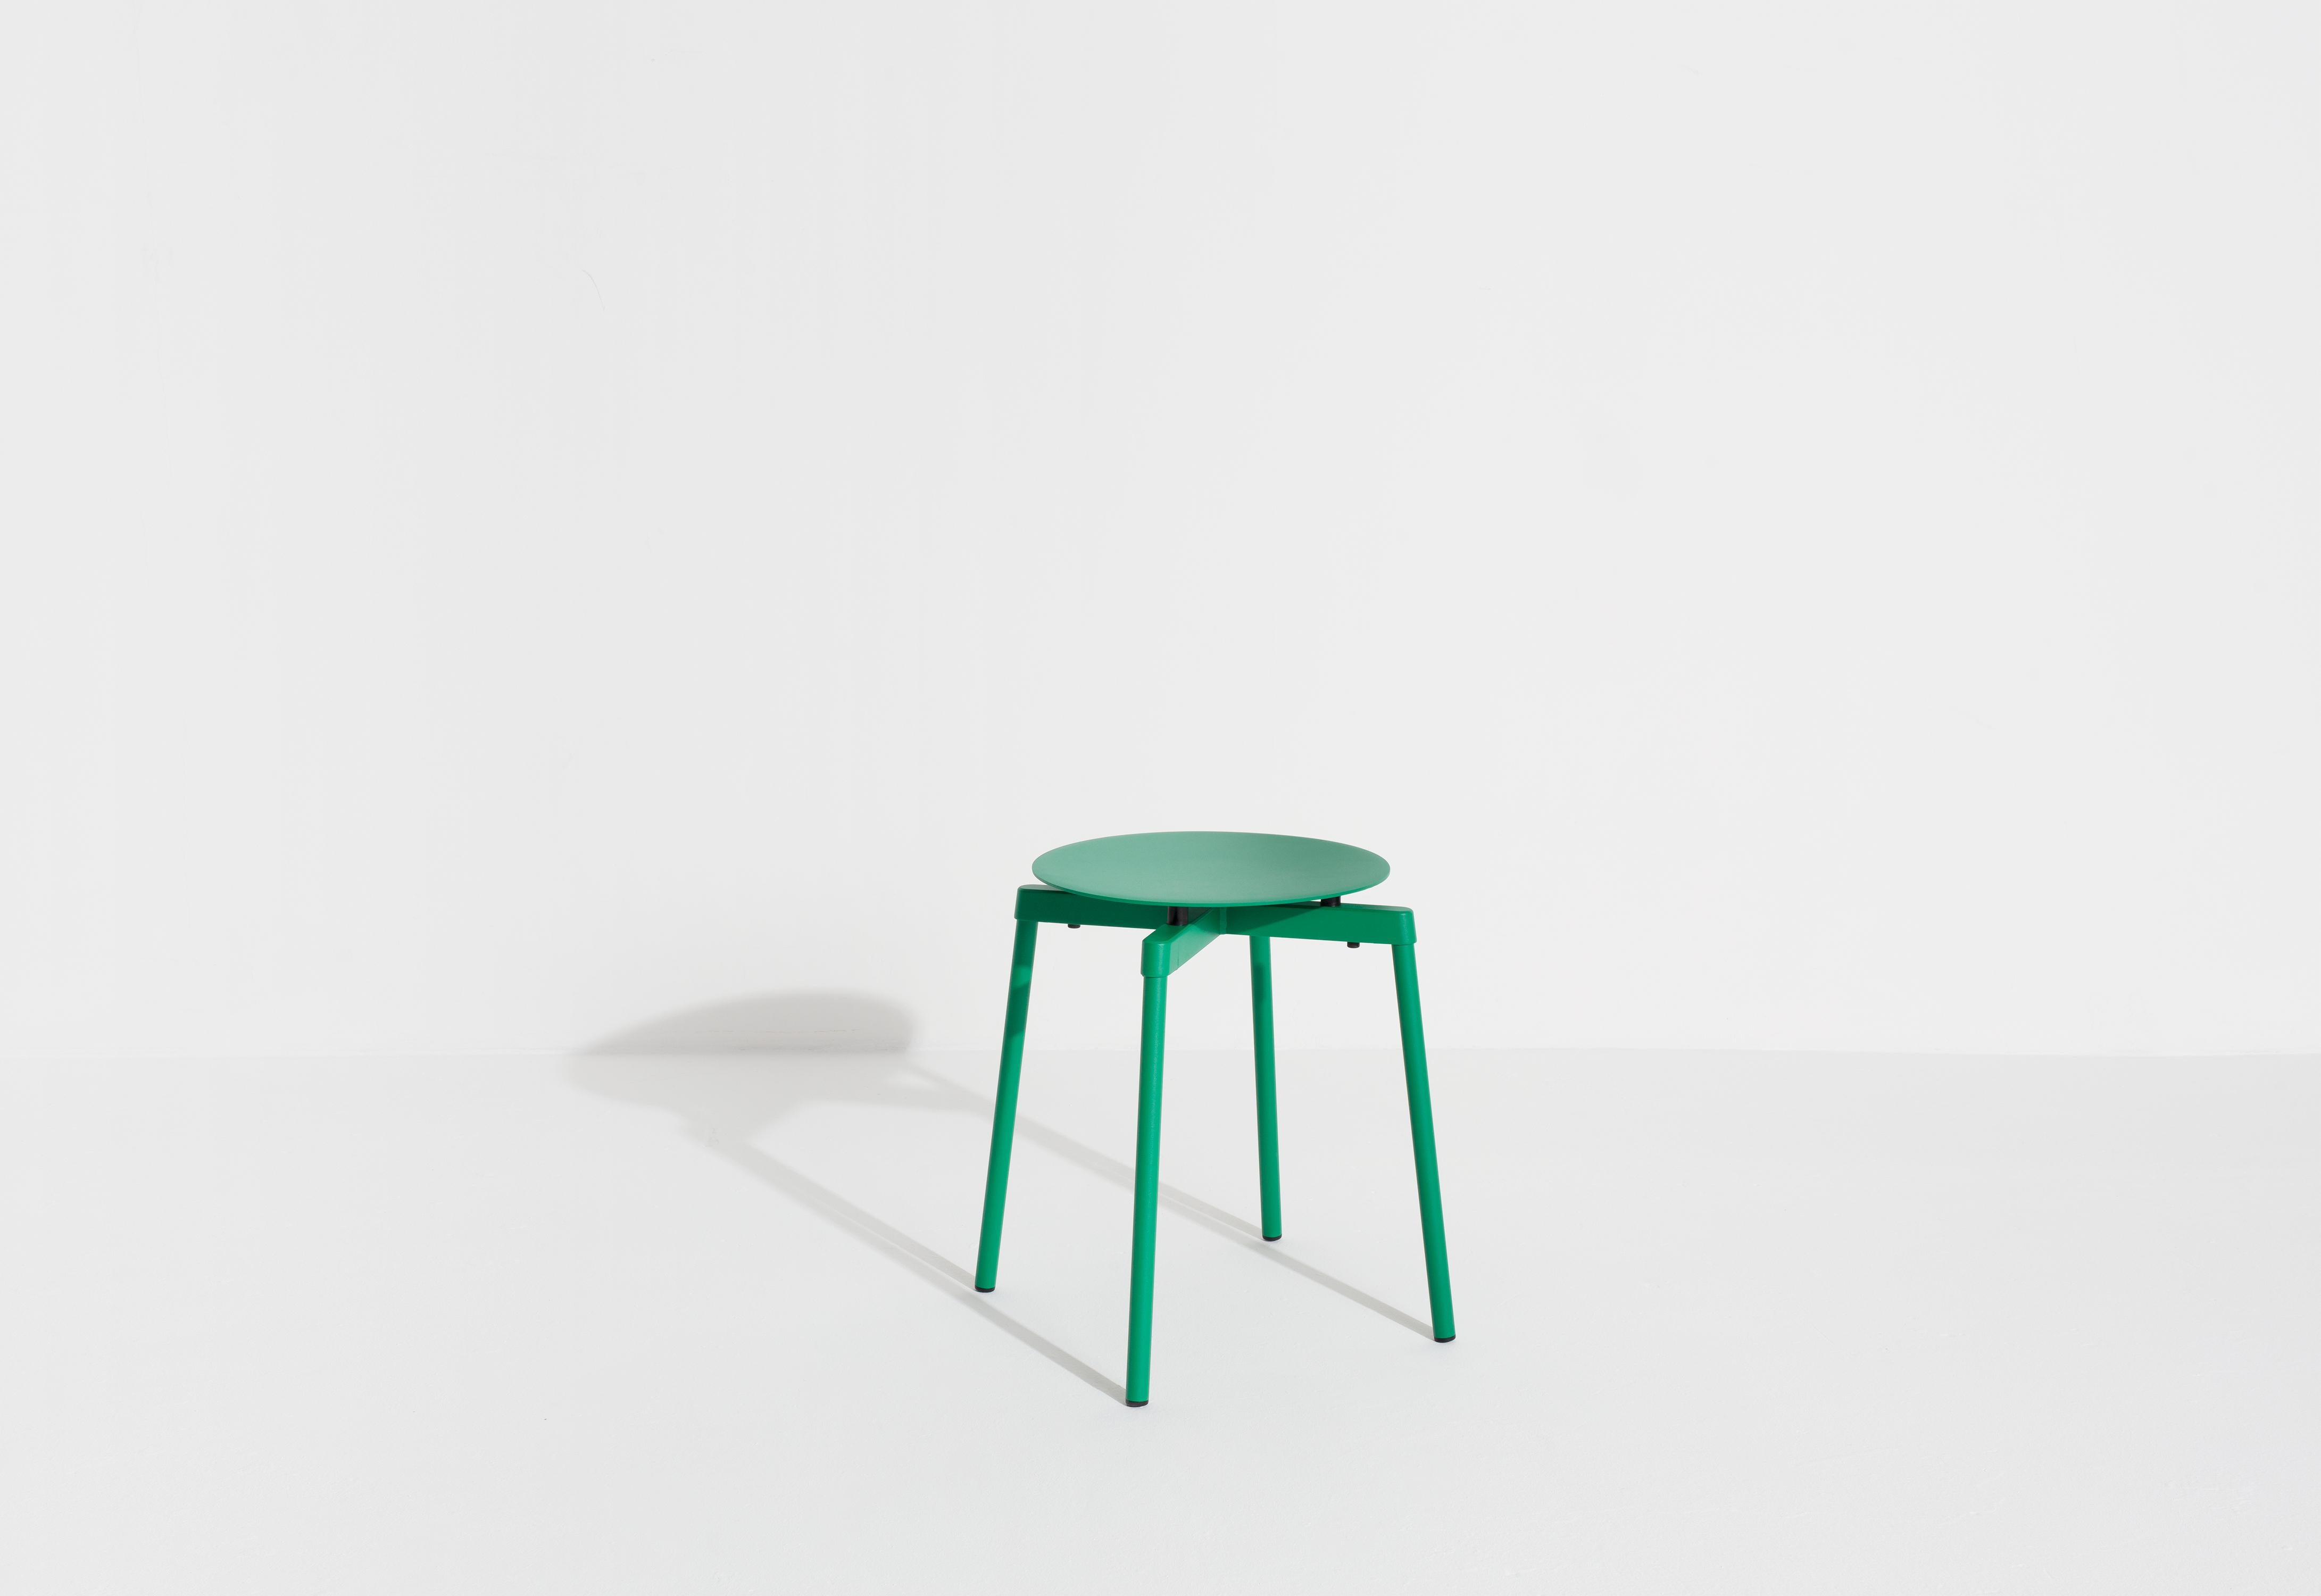 Chinese Petite Friture Fromme Stool in Mint-Green Aluminium by Tom Chung, 2020 For Sale